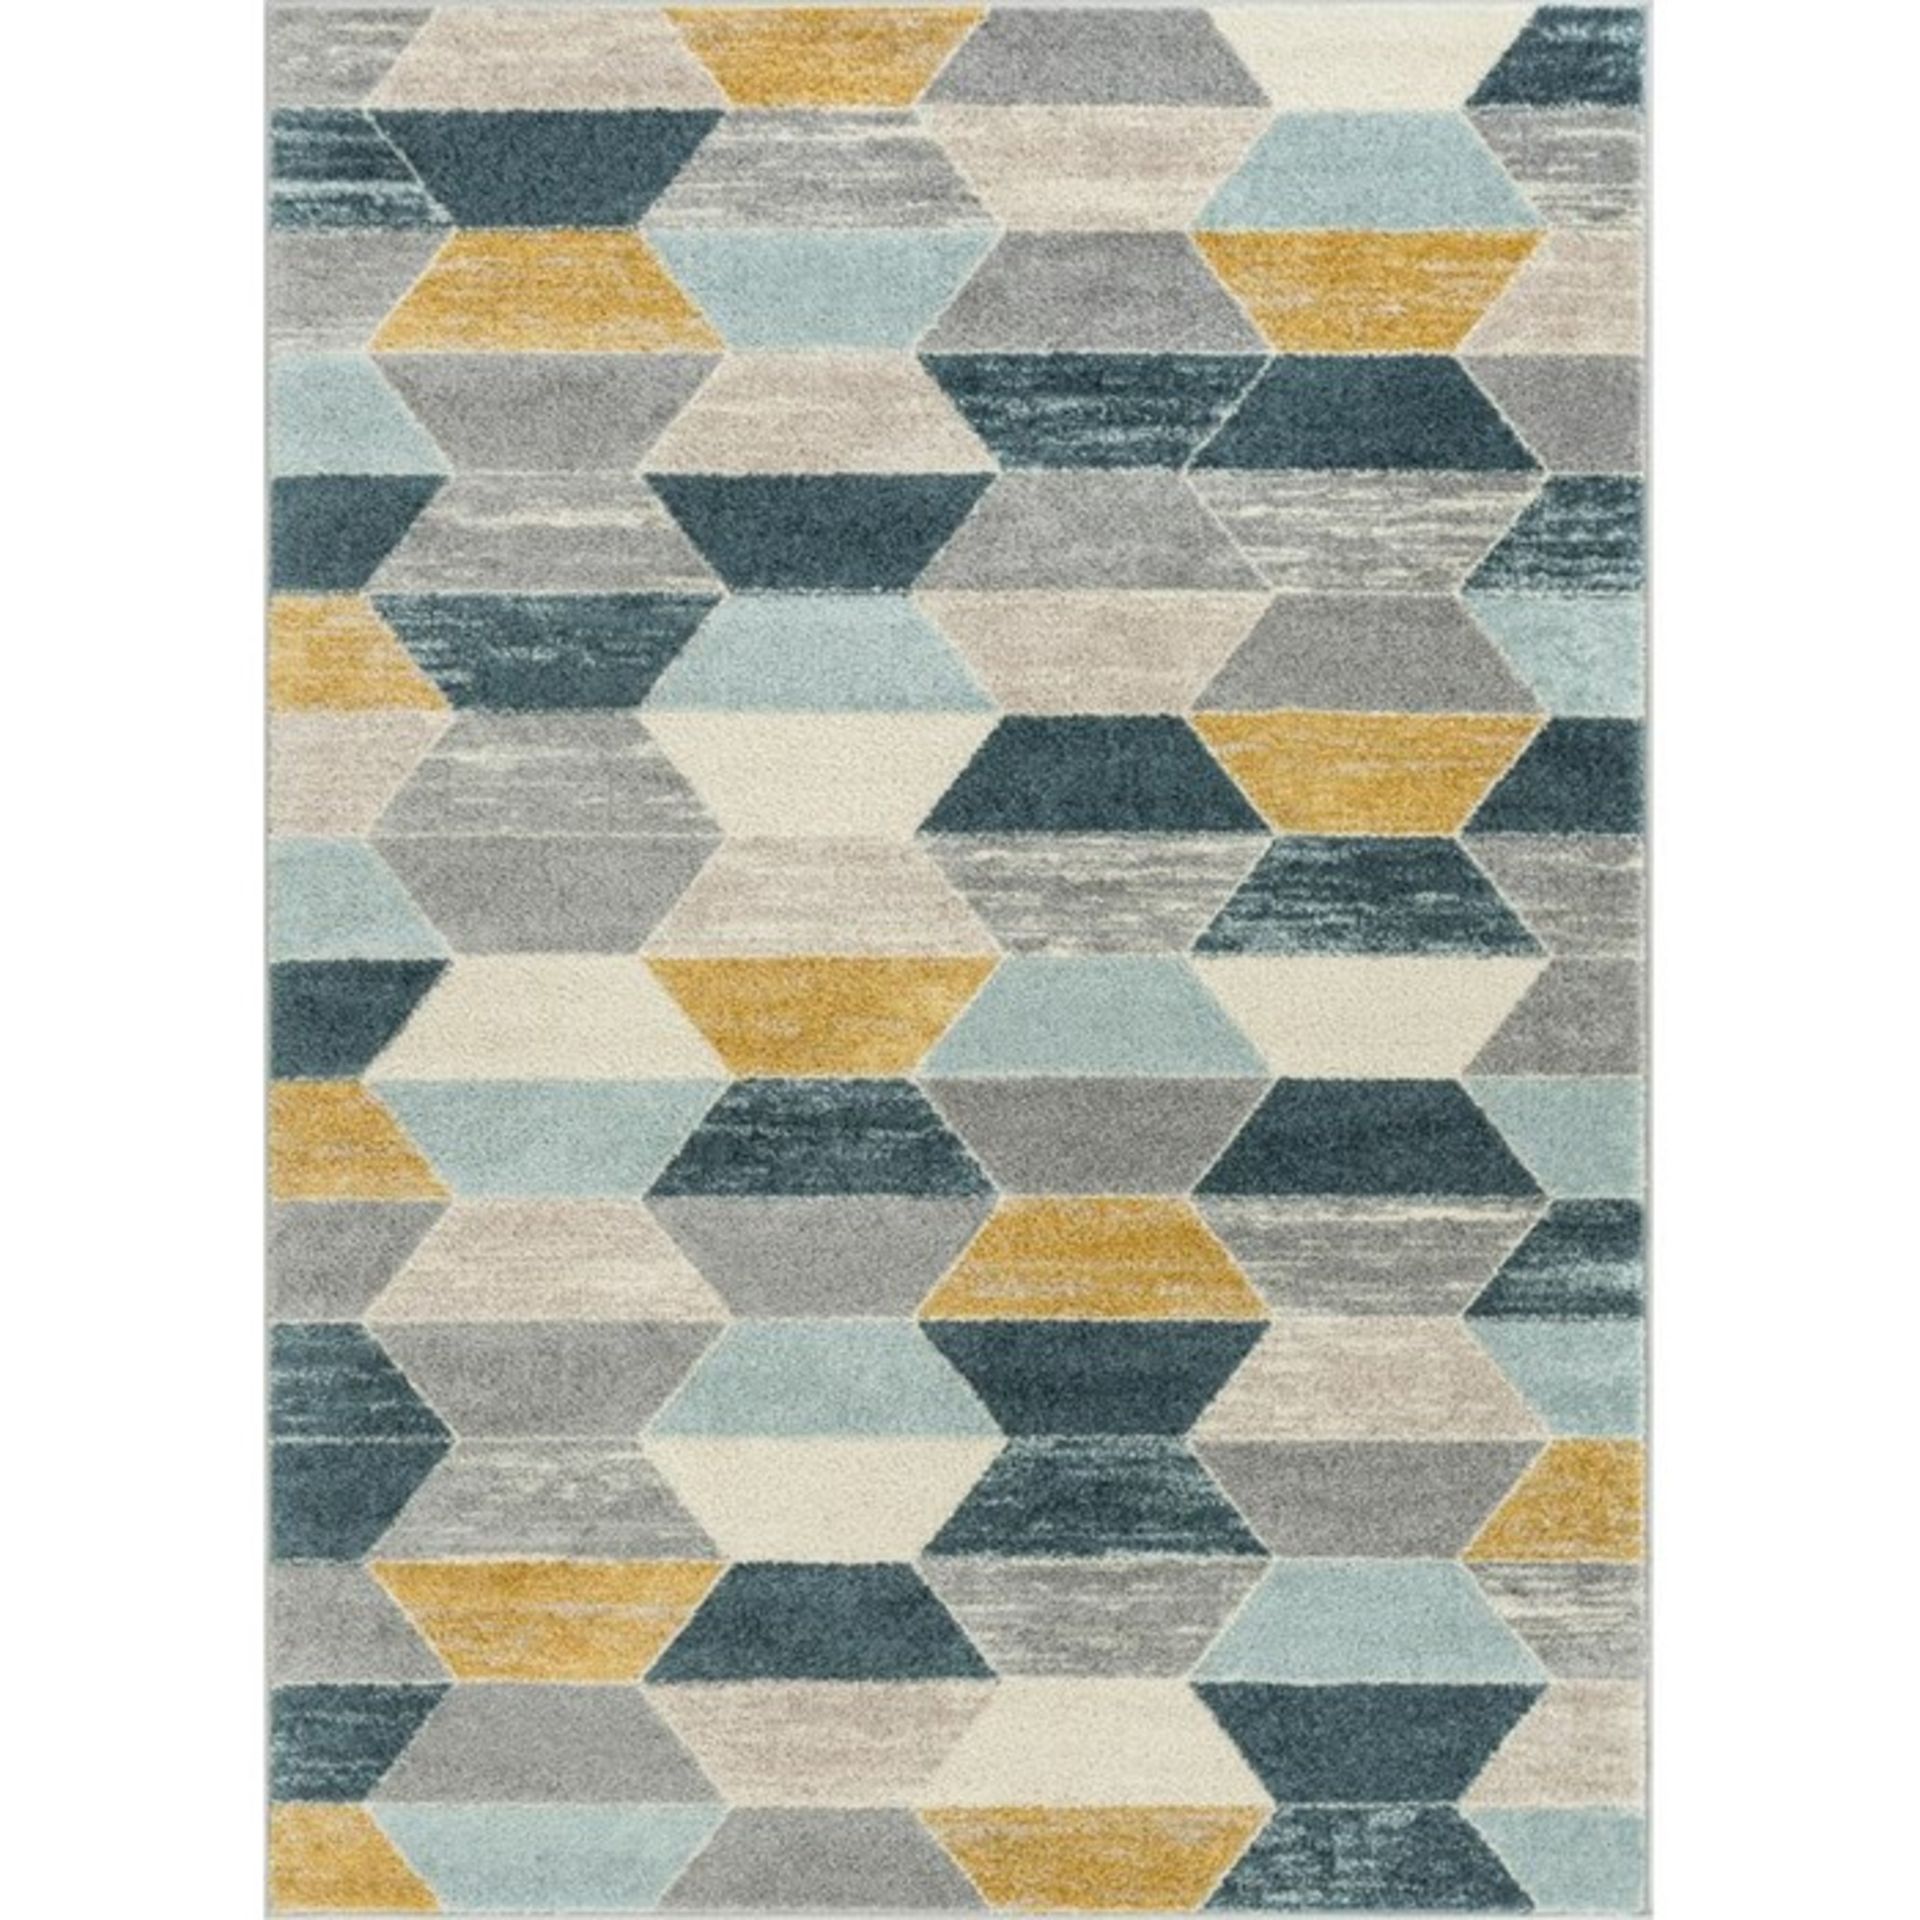 Well Woven,Mystic Blue/Grey/Yellow Rug RRP -£33.99 (120x160cm)(14006/44 -XBRB1005)